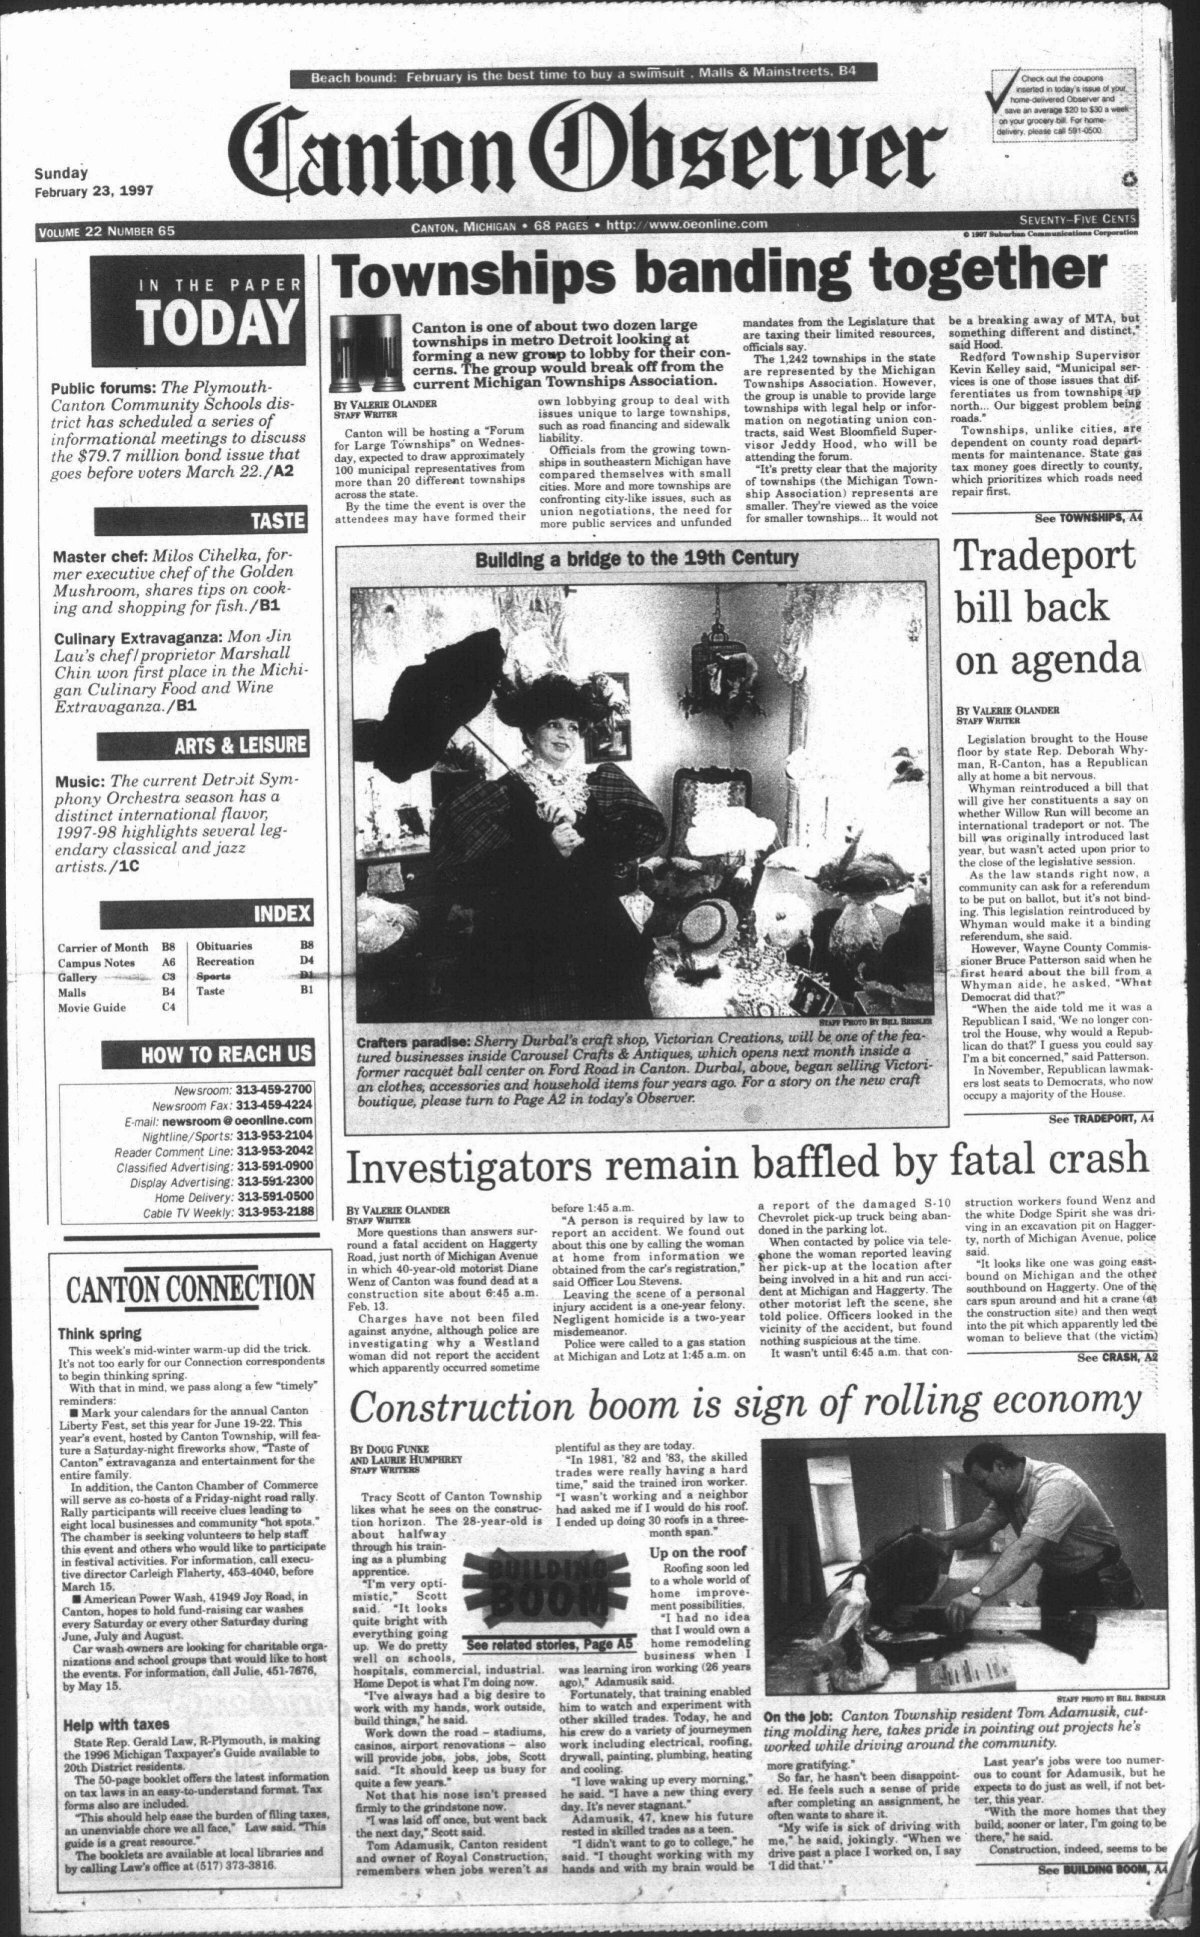 Canton Observer for February 23, 1997 - Canton Public Library